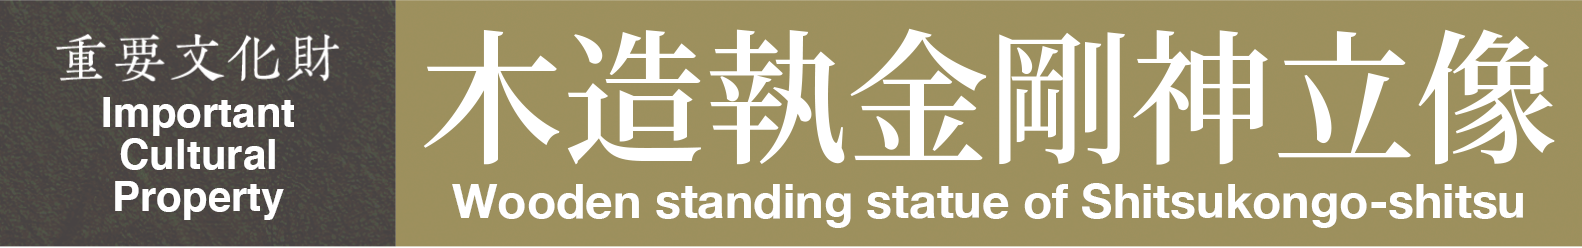 Important Cultural Property　Wooden standing statue of Shitsukongo-shitsu